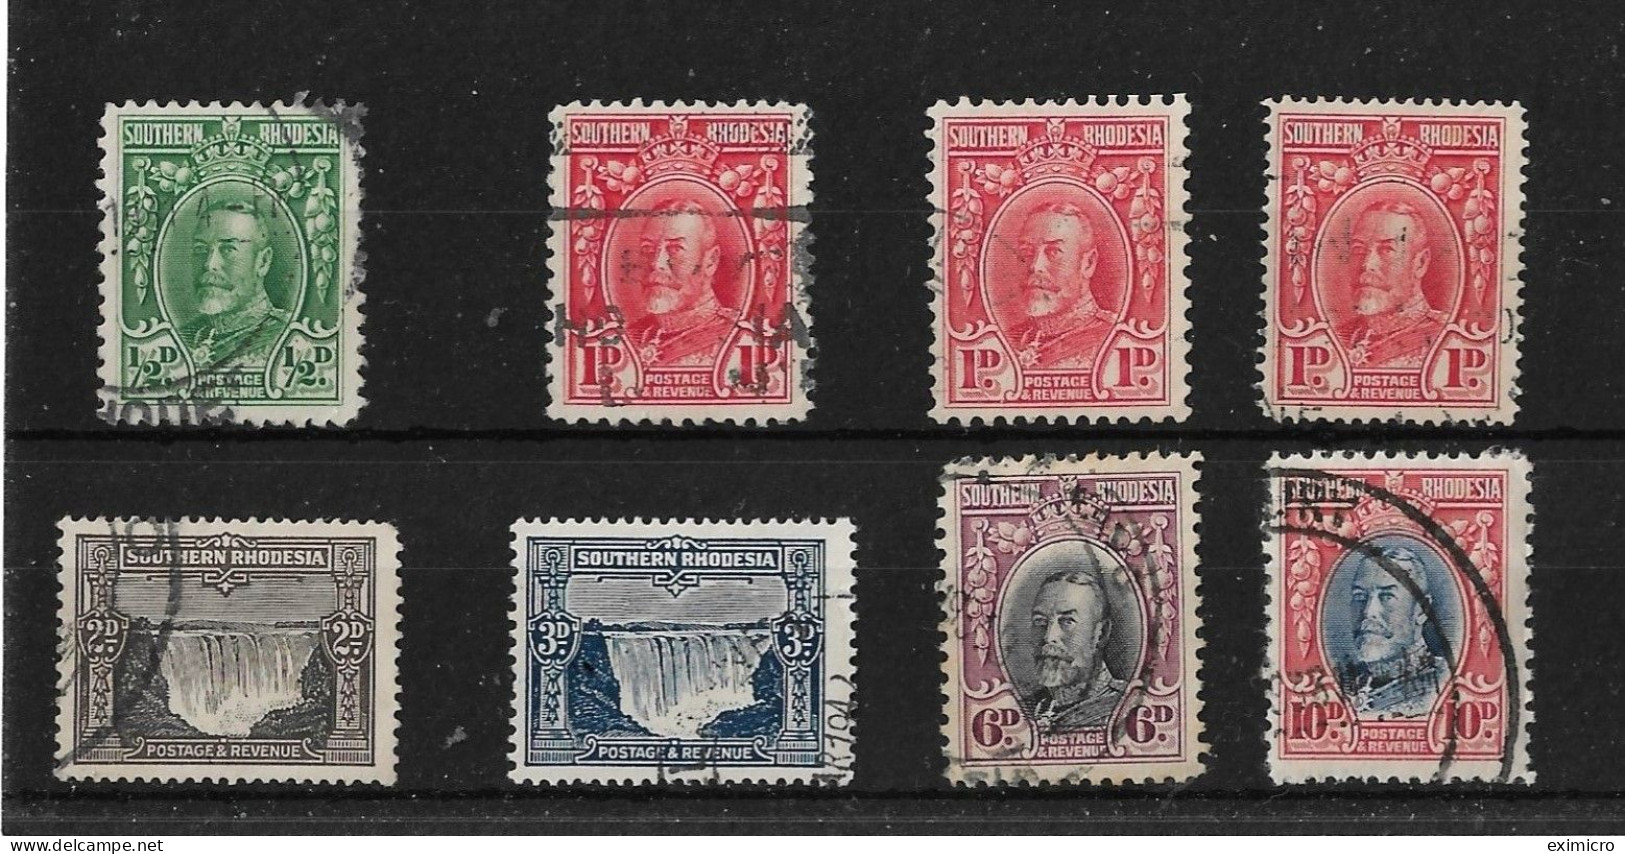 SOUTHERN RHODESIA 1931 - 1937 VALUES TO 10d SG 15,16,16a,16b,17,18,20,22 FINE USED Cat £25+ - Rhodesia Del Sud (...-1964)